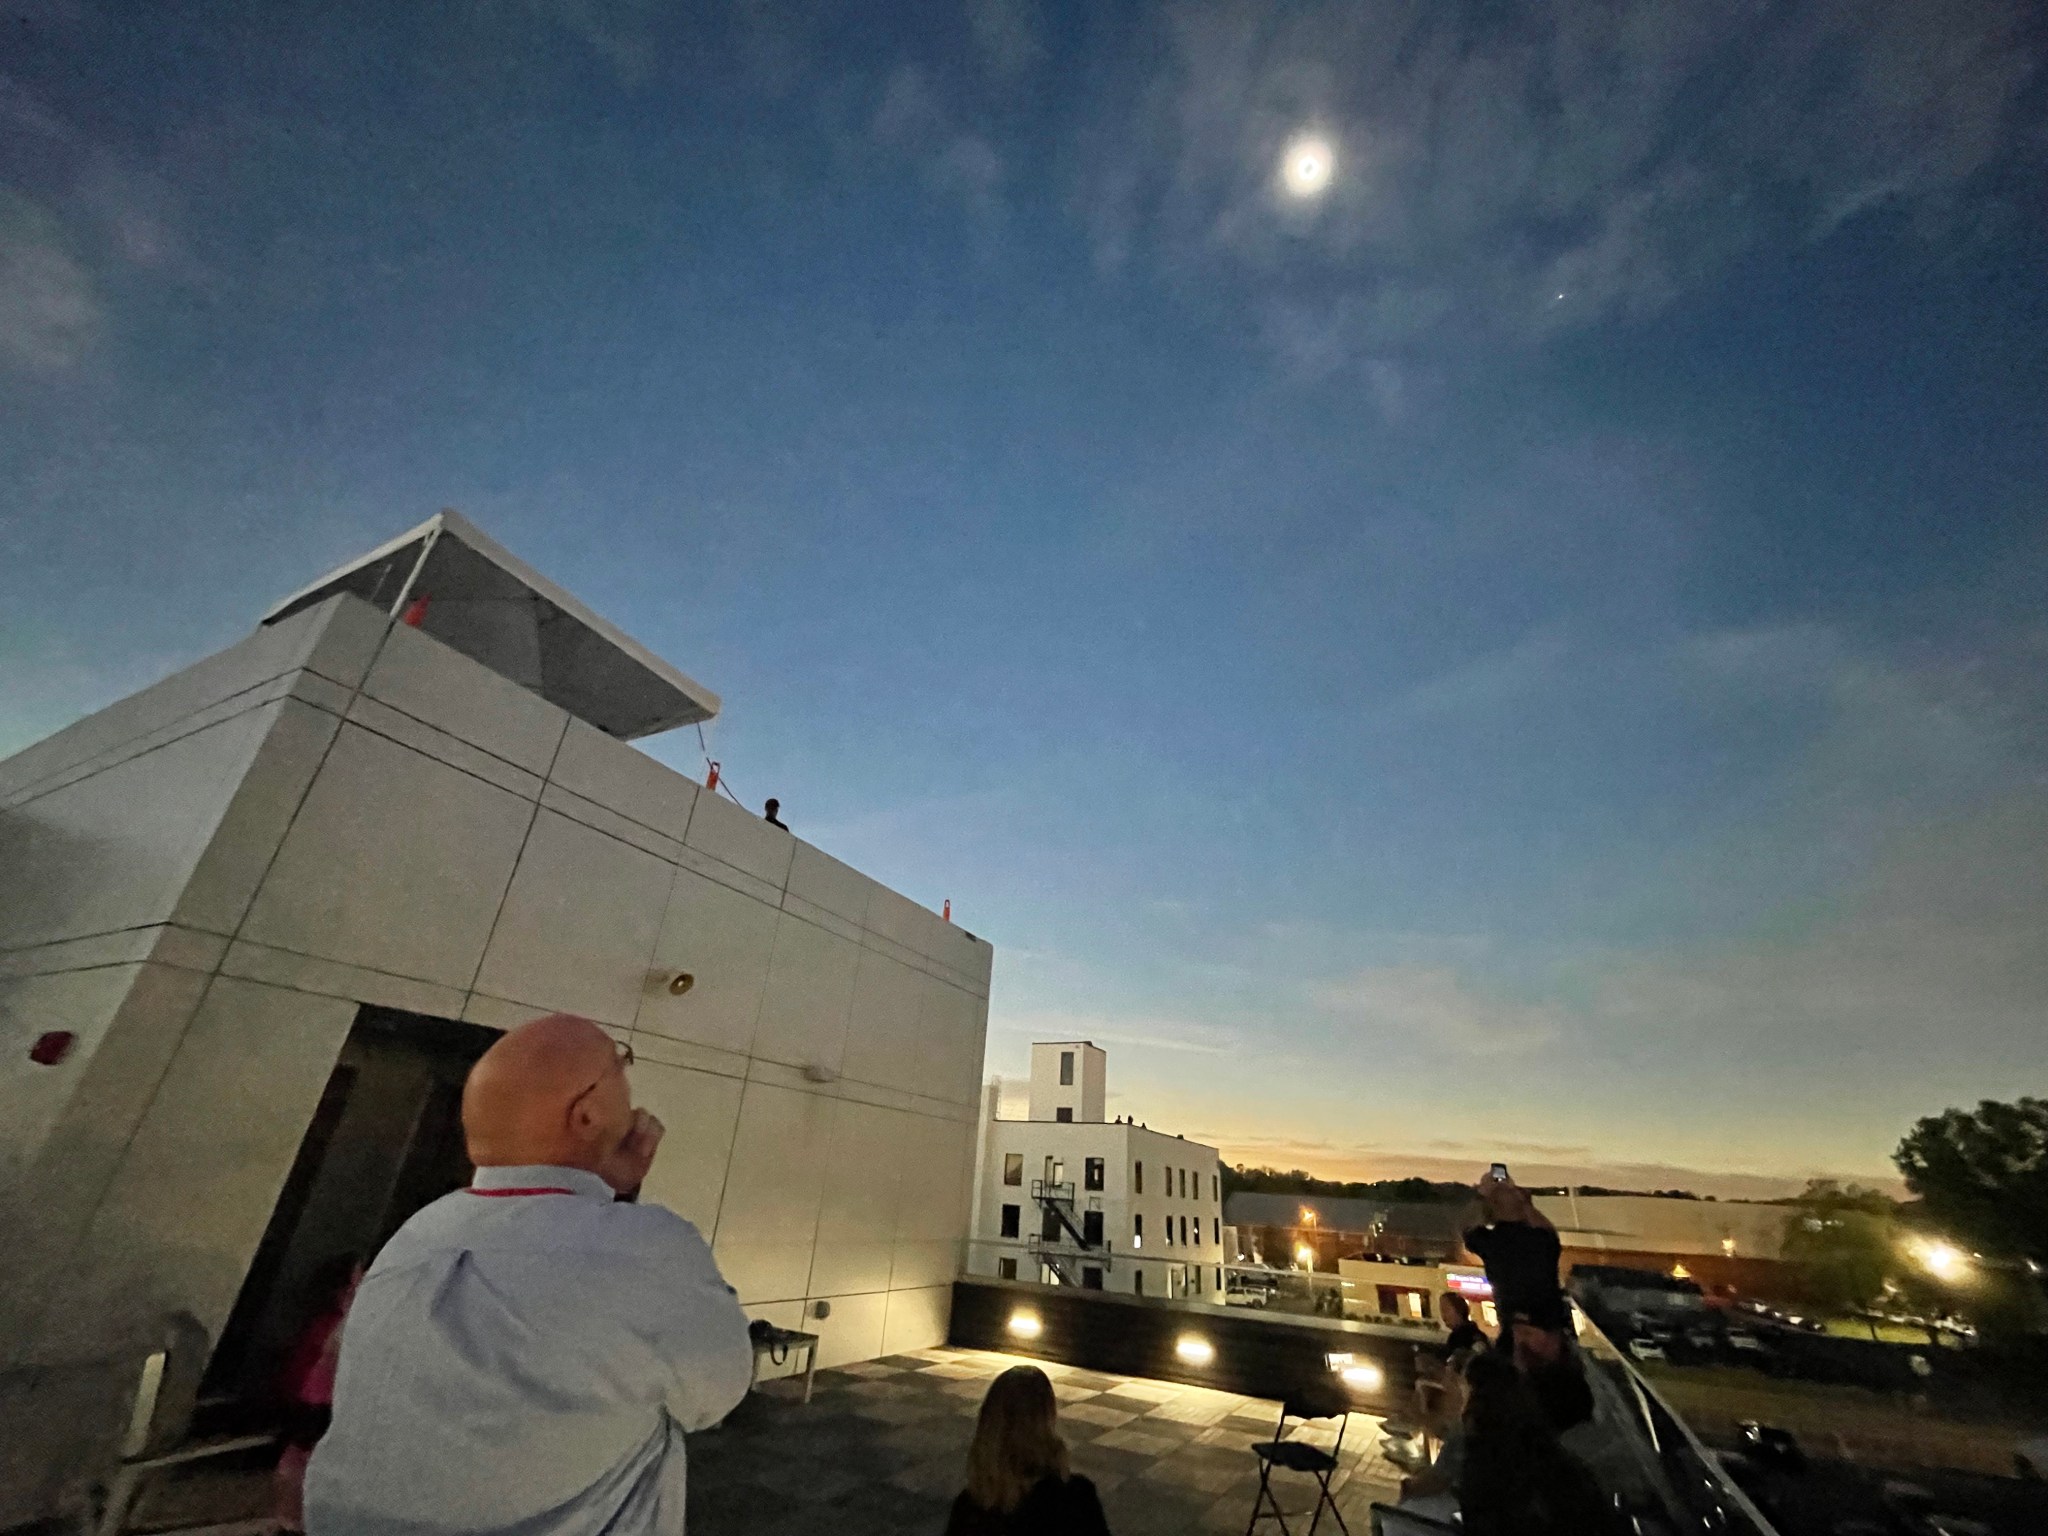 Marshall Space Flight Center Director Joseph Pelfrey watches the 2024 total solar eclipse from the mezzanine of the Russellville Central Fire Station in downtown Russellville, Arkansas, on April 8. Pelfrey spoke during a press conference the morning of the eclipse, alongside Stennis Space Center Acting Director John Bailey, retired astronaut Mike Massimino, NASA scientists, and Russellville and Pope County community leaders. Pelfrey shared updates on the data that NASA’s Heliophysics Division, based at Marshall, planned to collect from the eclipse to improve life here on Earth.